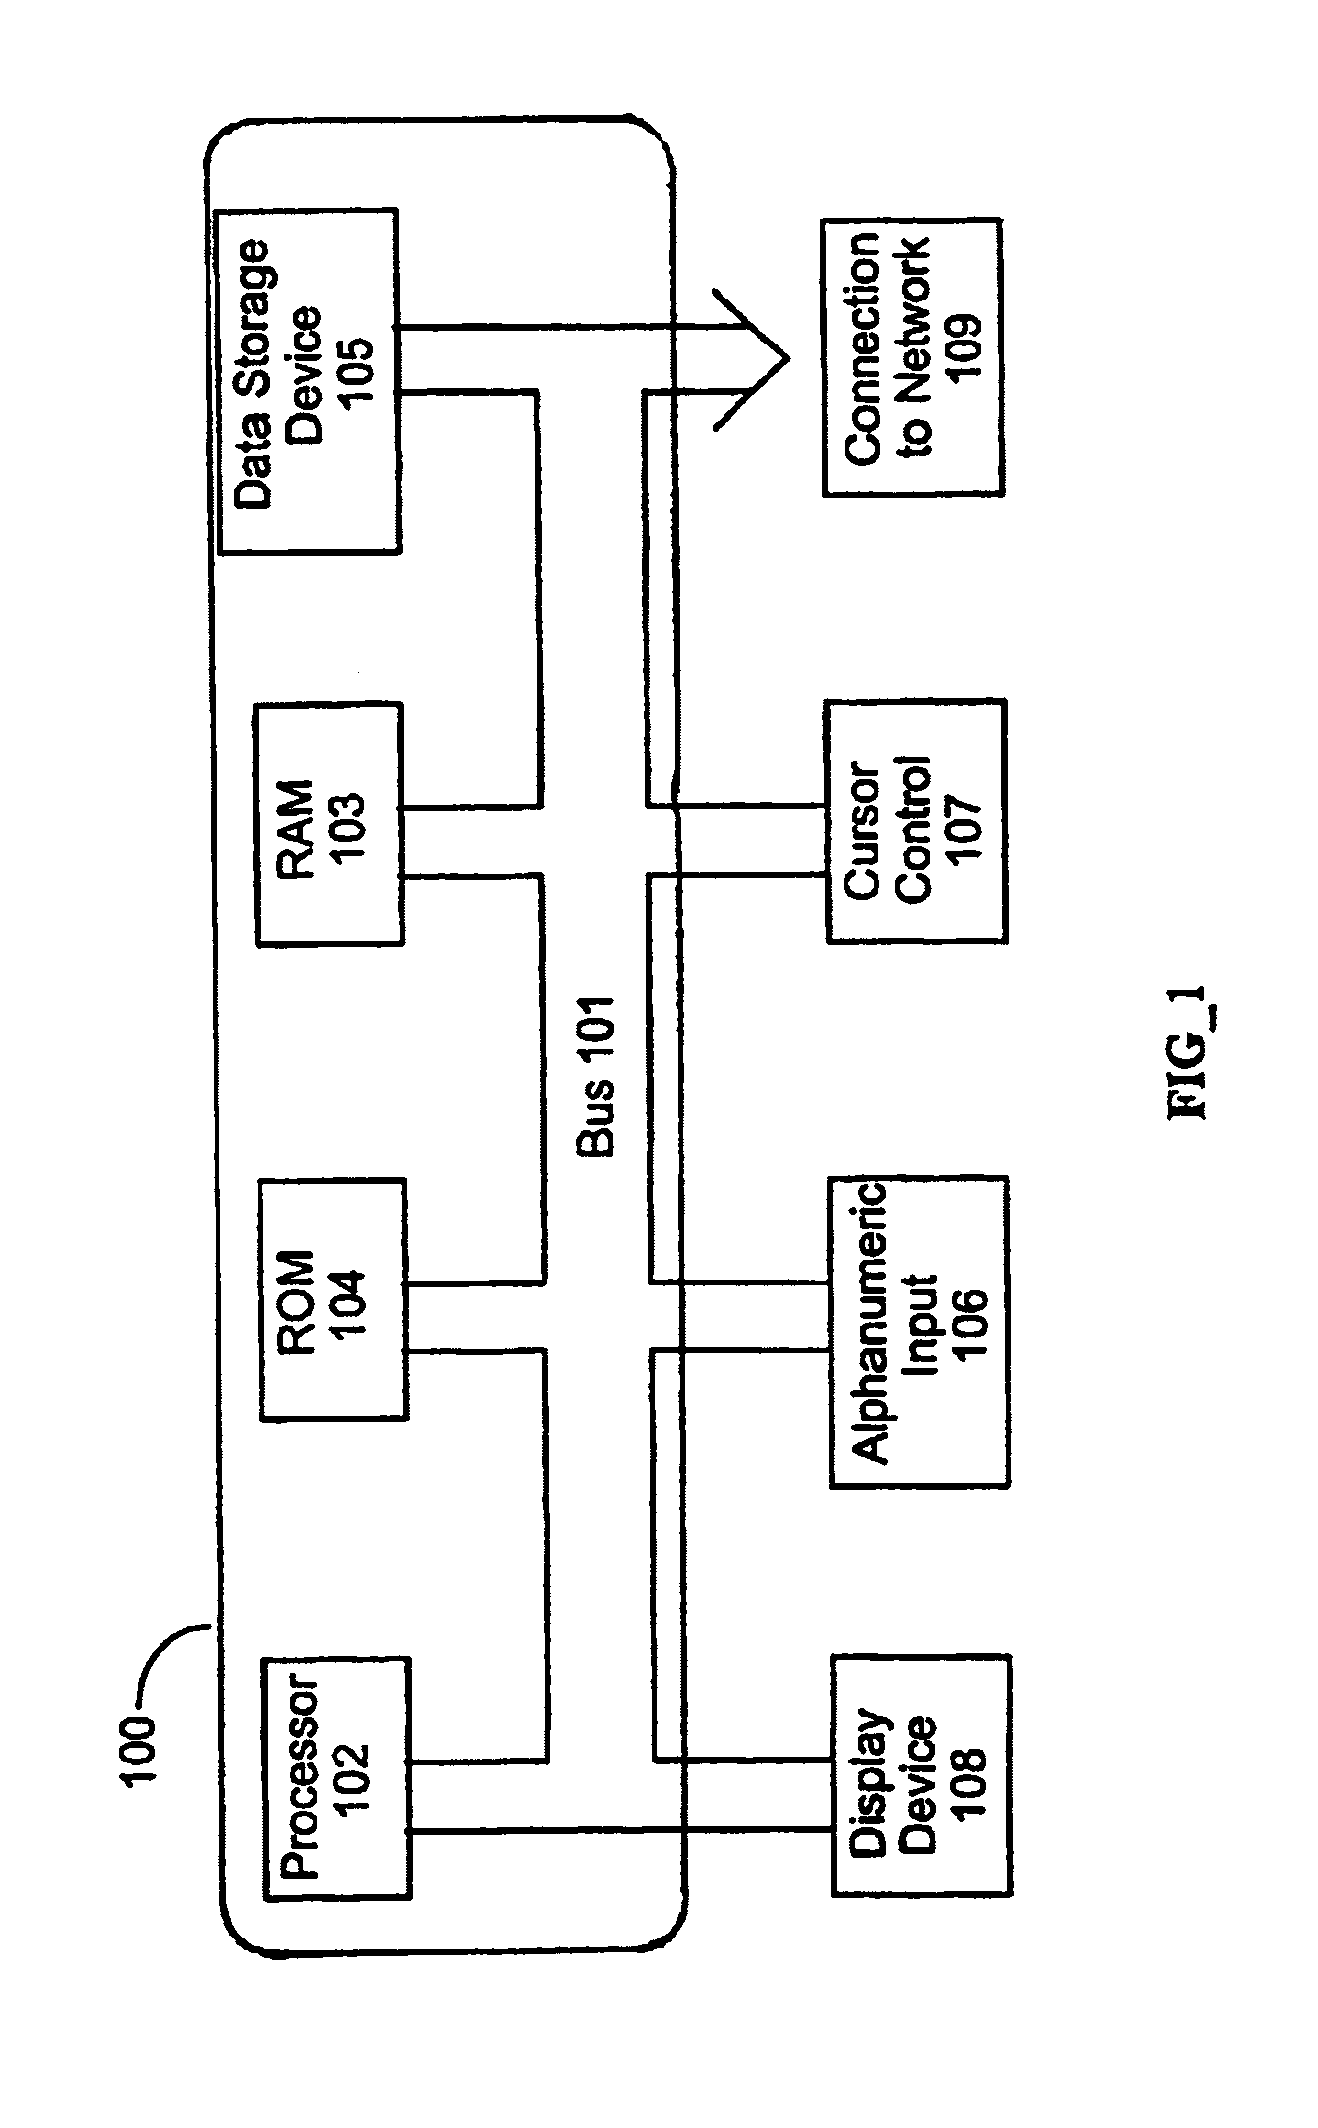 Automatic traffic and quality of service control system for communications networks